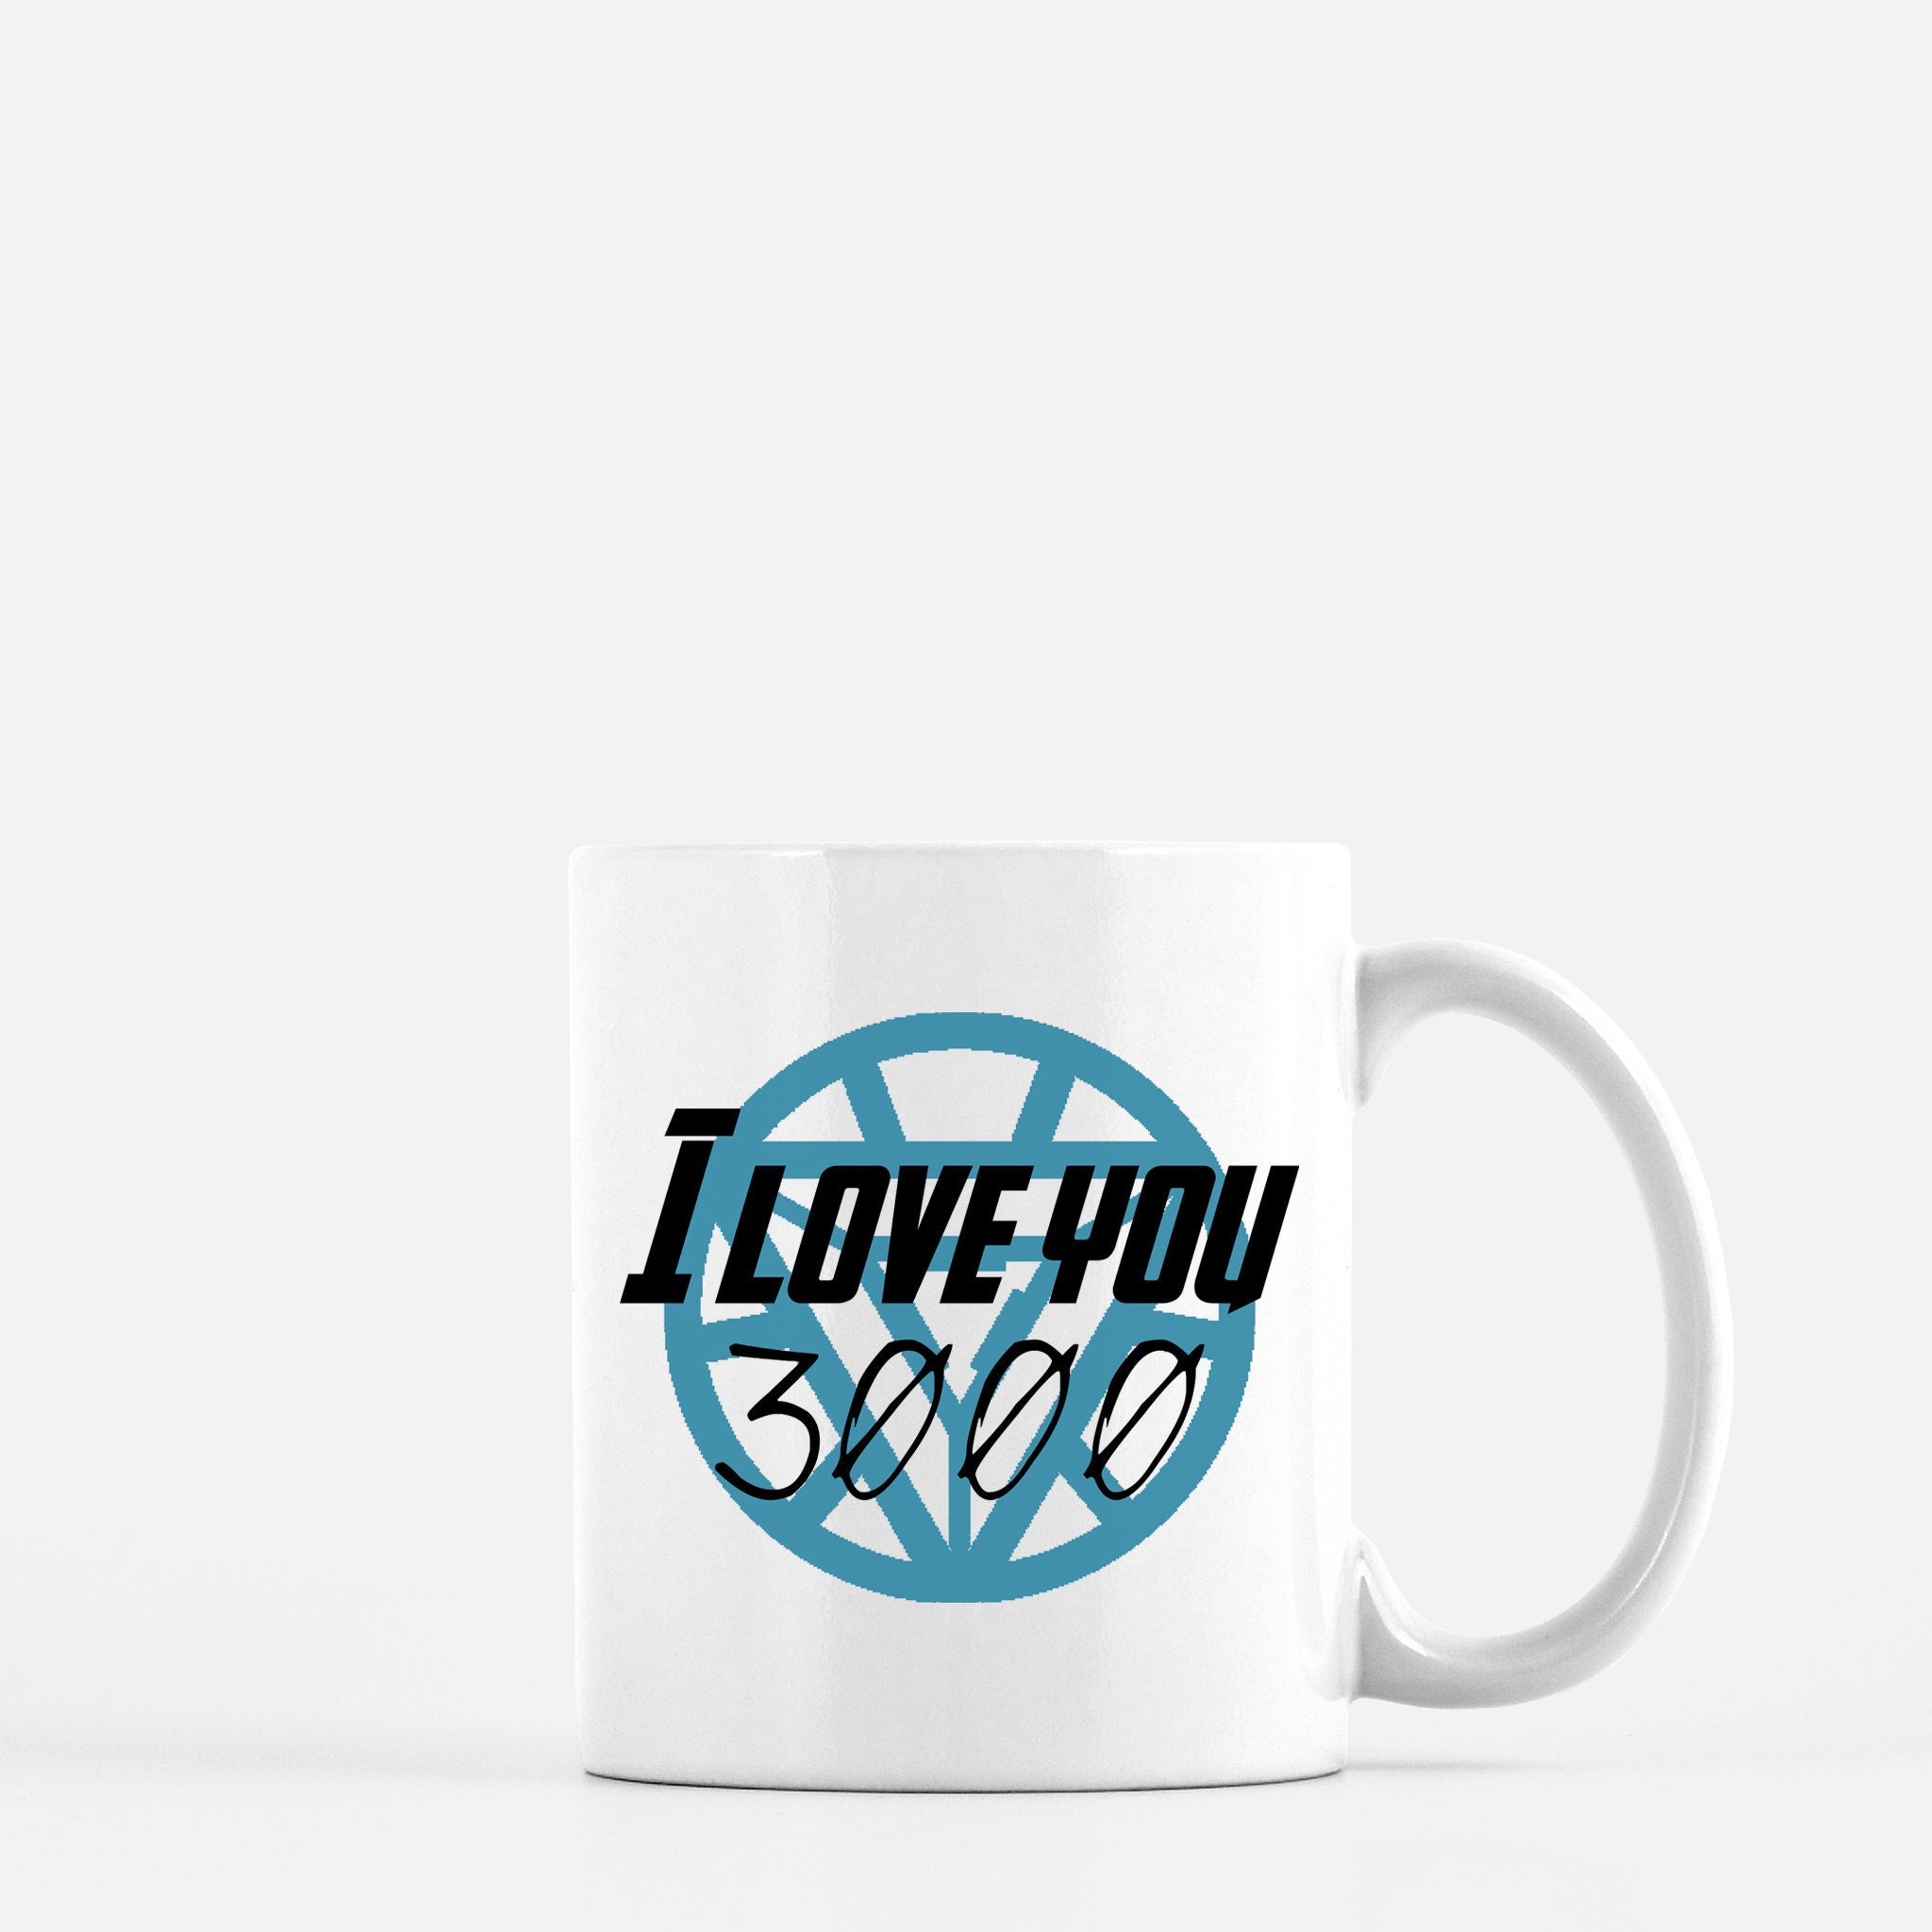 Stan-Lee- Classic Coffee Mugs 11oz Ceramic Tea Cups,Excelsior! Stan Lee,One  Size : : Home & Kitchen